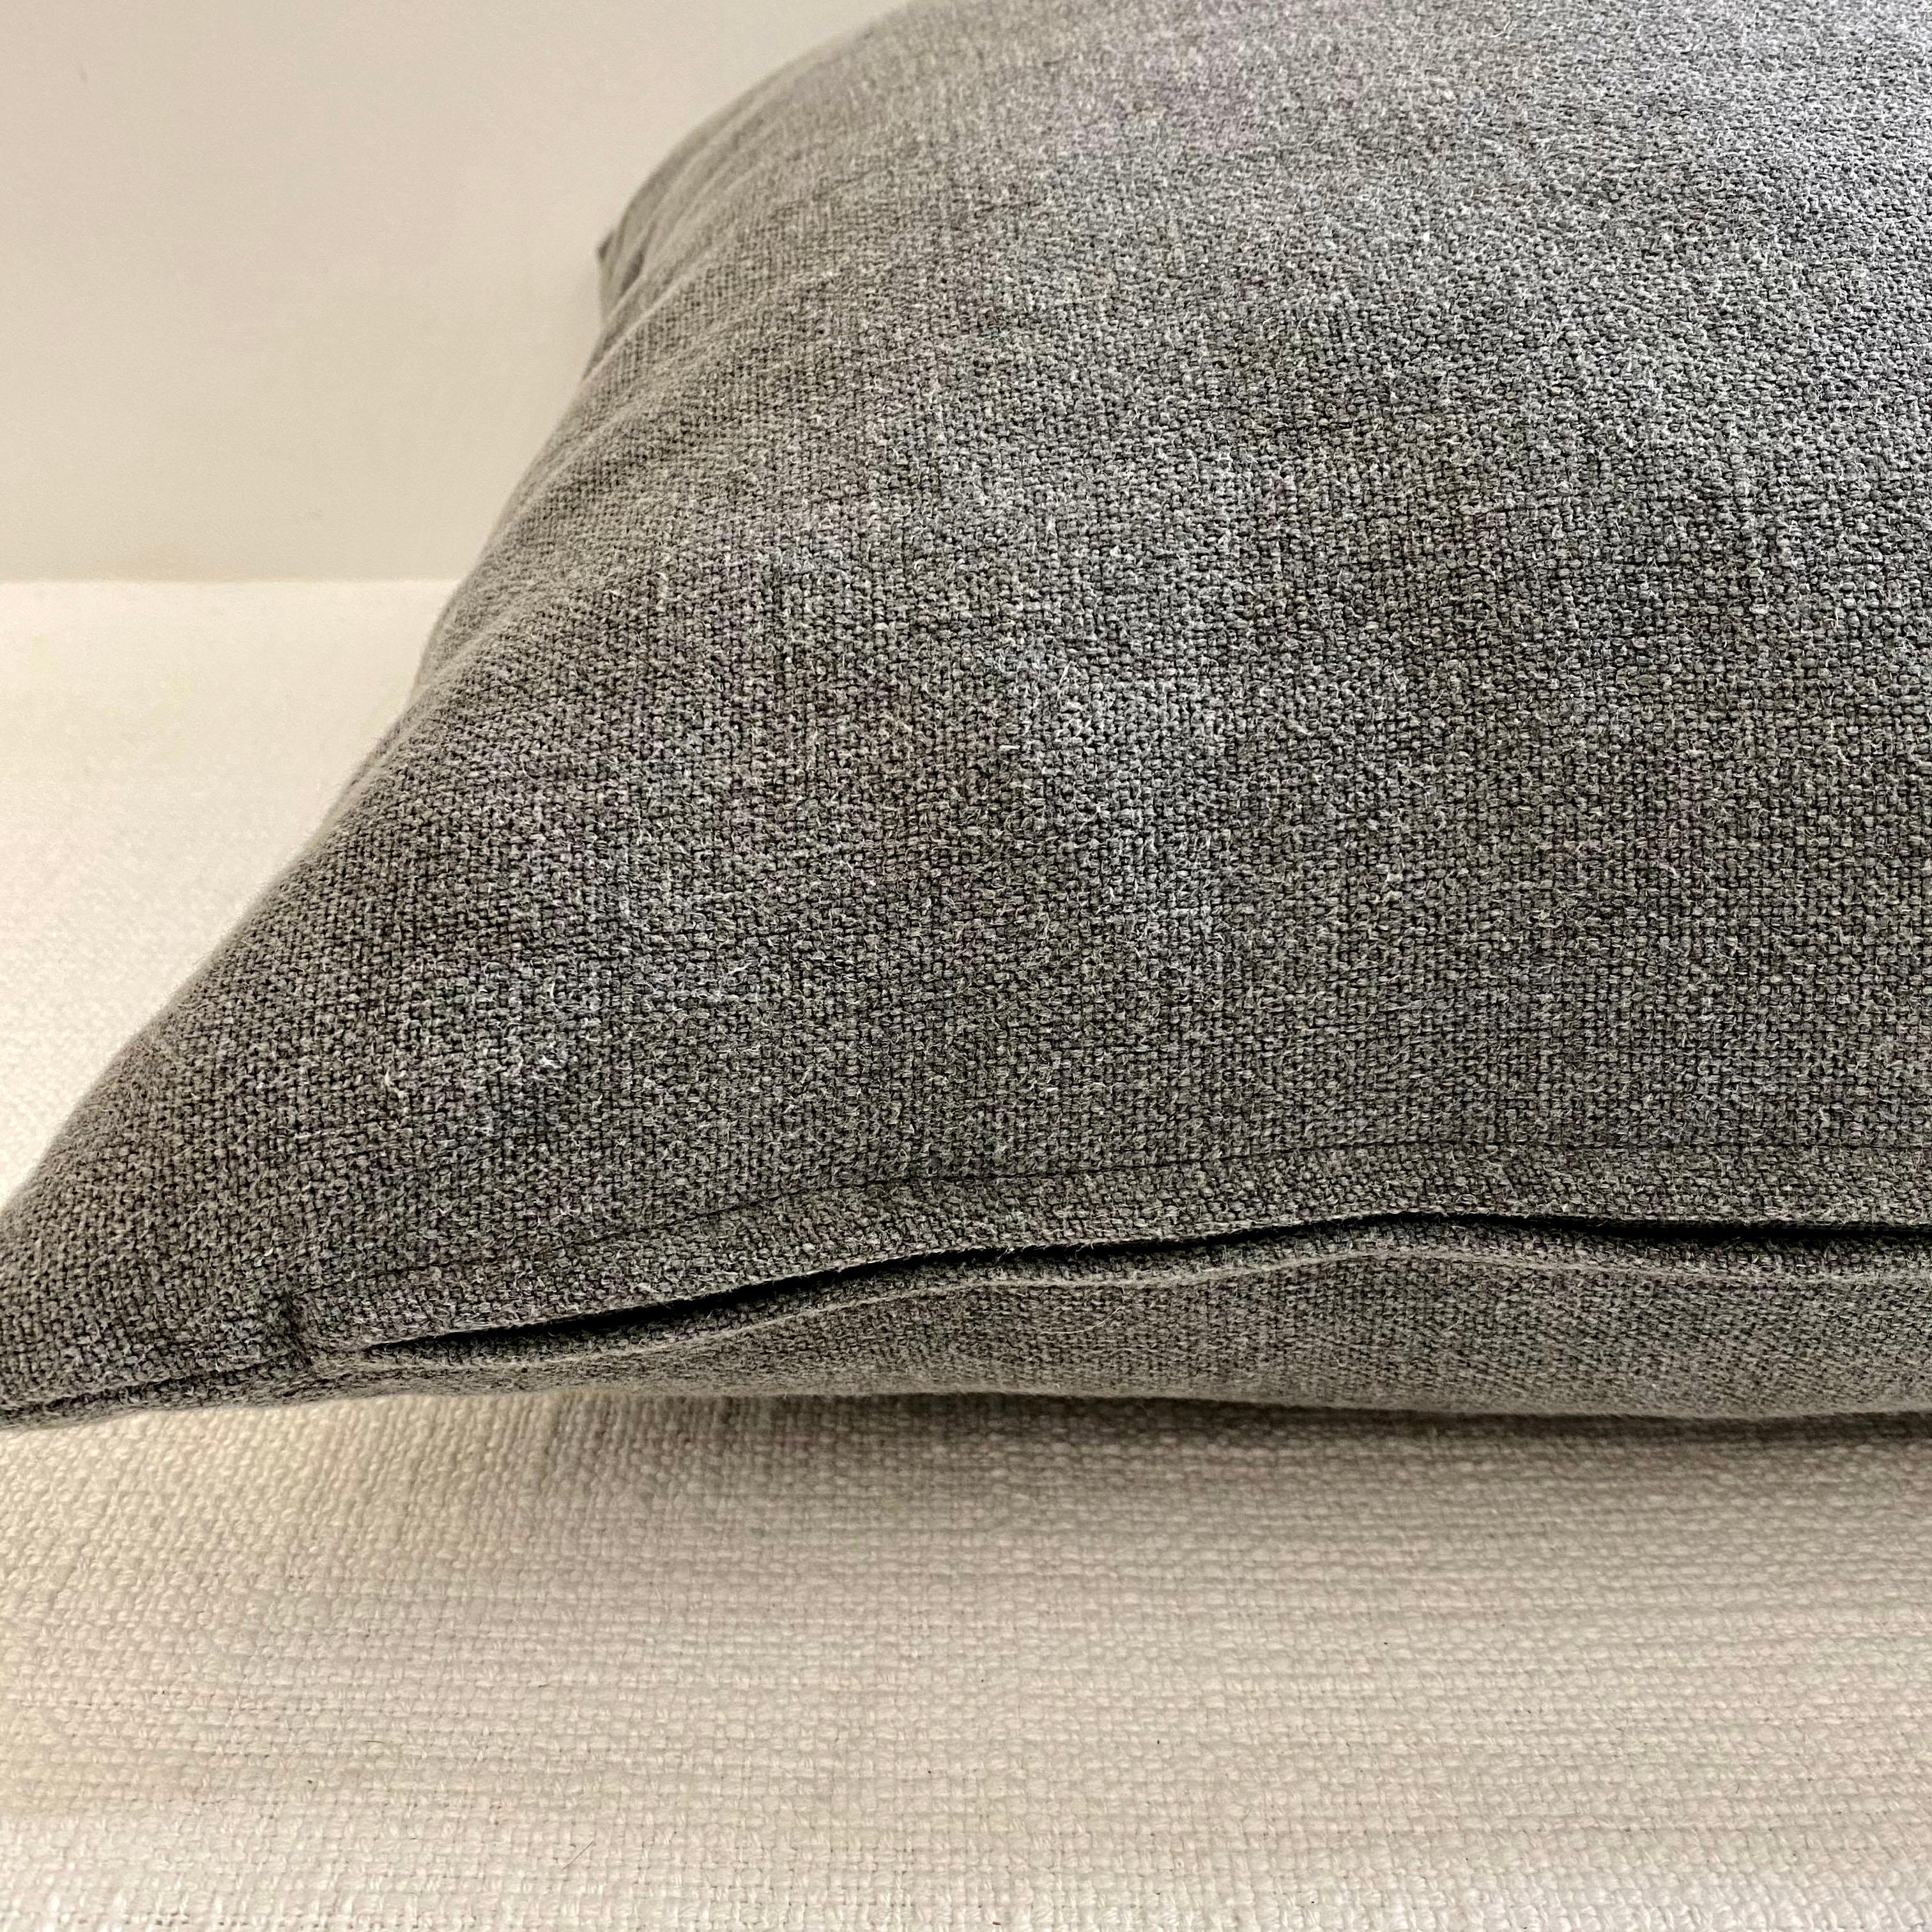 Custom dark gray stone washed linen pillow with down feather insert.
Heavy European linen in a dark charcoal gray, with zipper closure.
Overlocked seams, can be machine washed.
Size: 22 x 22.
  